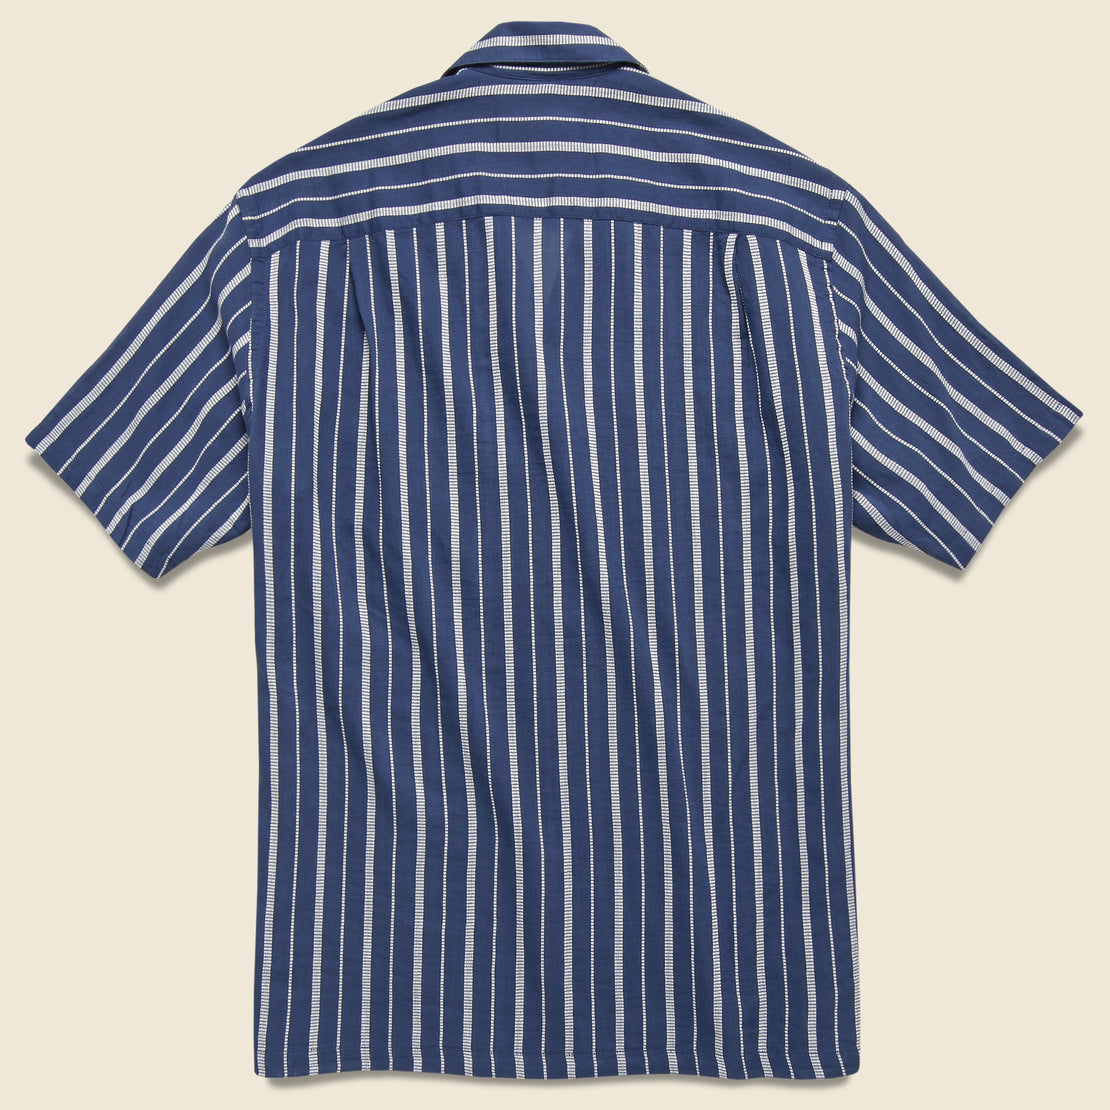 Jimmy Camp Shirt - Blue/White - Portuguese Flannel - STAG Provisions - Tops - S/S Woven - Stripe